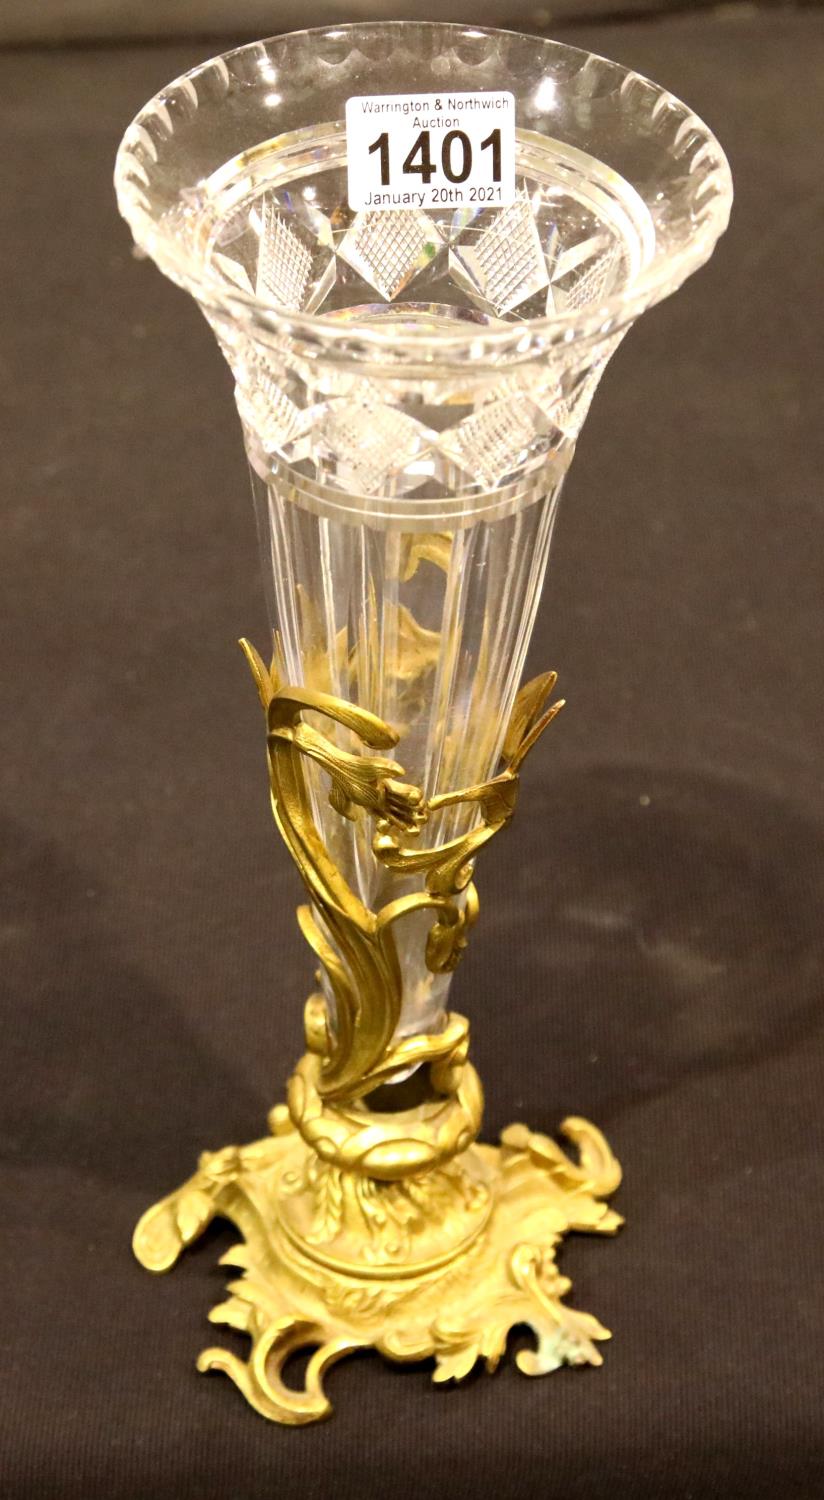 19th century French cut glass conical Escalier de Cristal vase raised in an ornate ormolu stand,